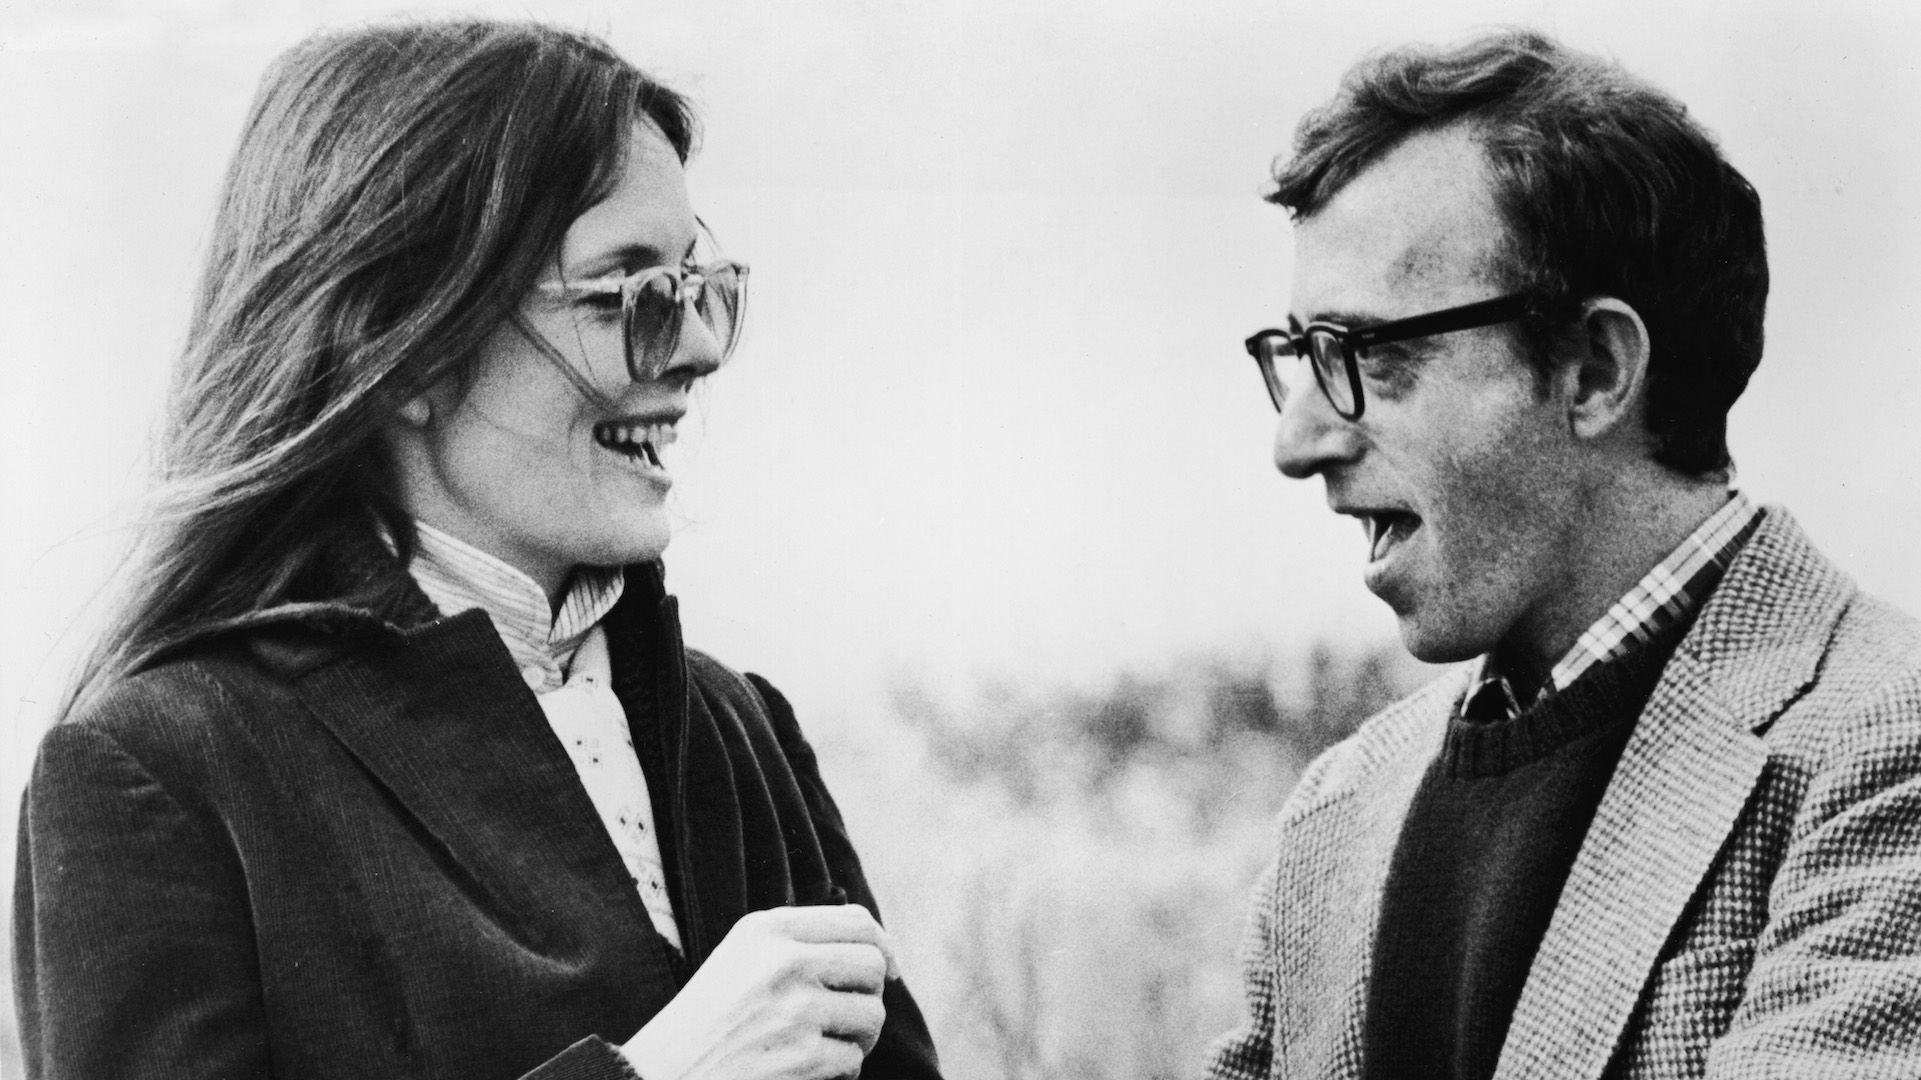 Annie Hall wallpapers, Top free, Iconic film, Classic background, 1930x1080 HD Desktop